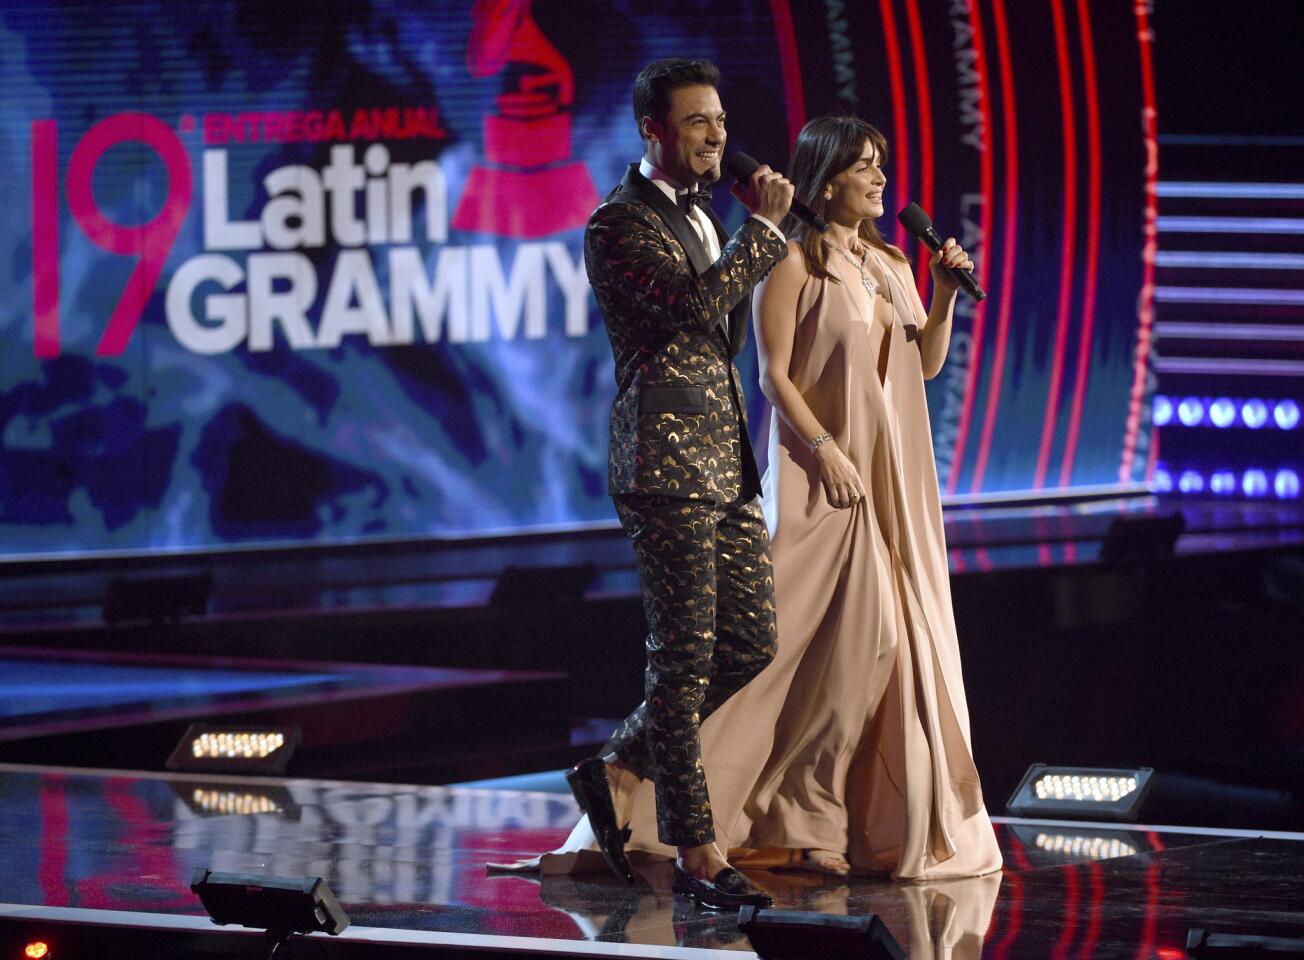 Hosts Carlos Rivera, left, and Ana De La Reguera speak at the Latin Grammy Awards at the MGM Grand Garden Arena in Las Vegas.